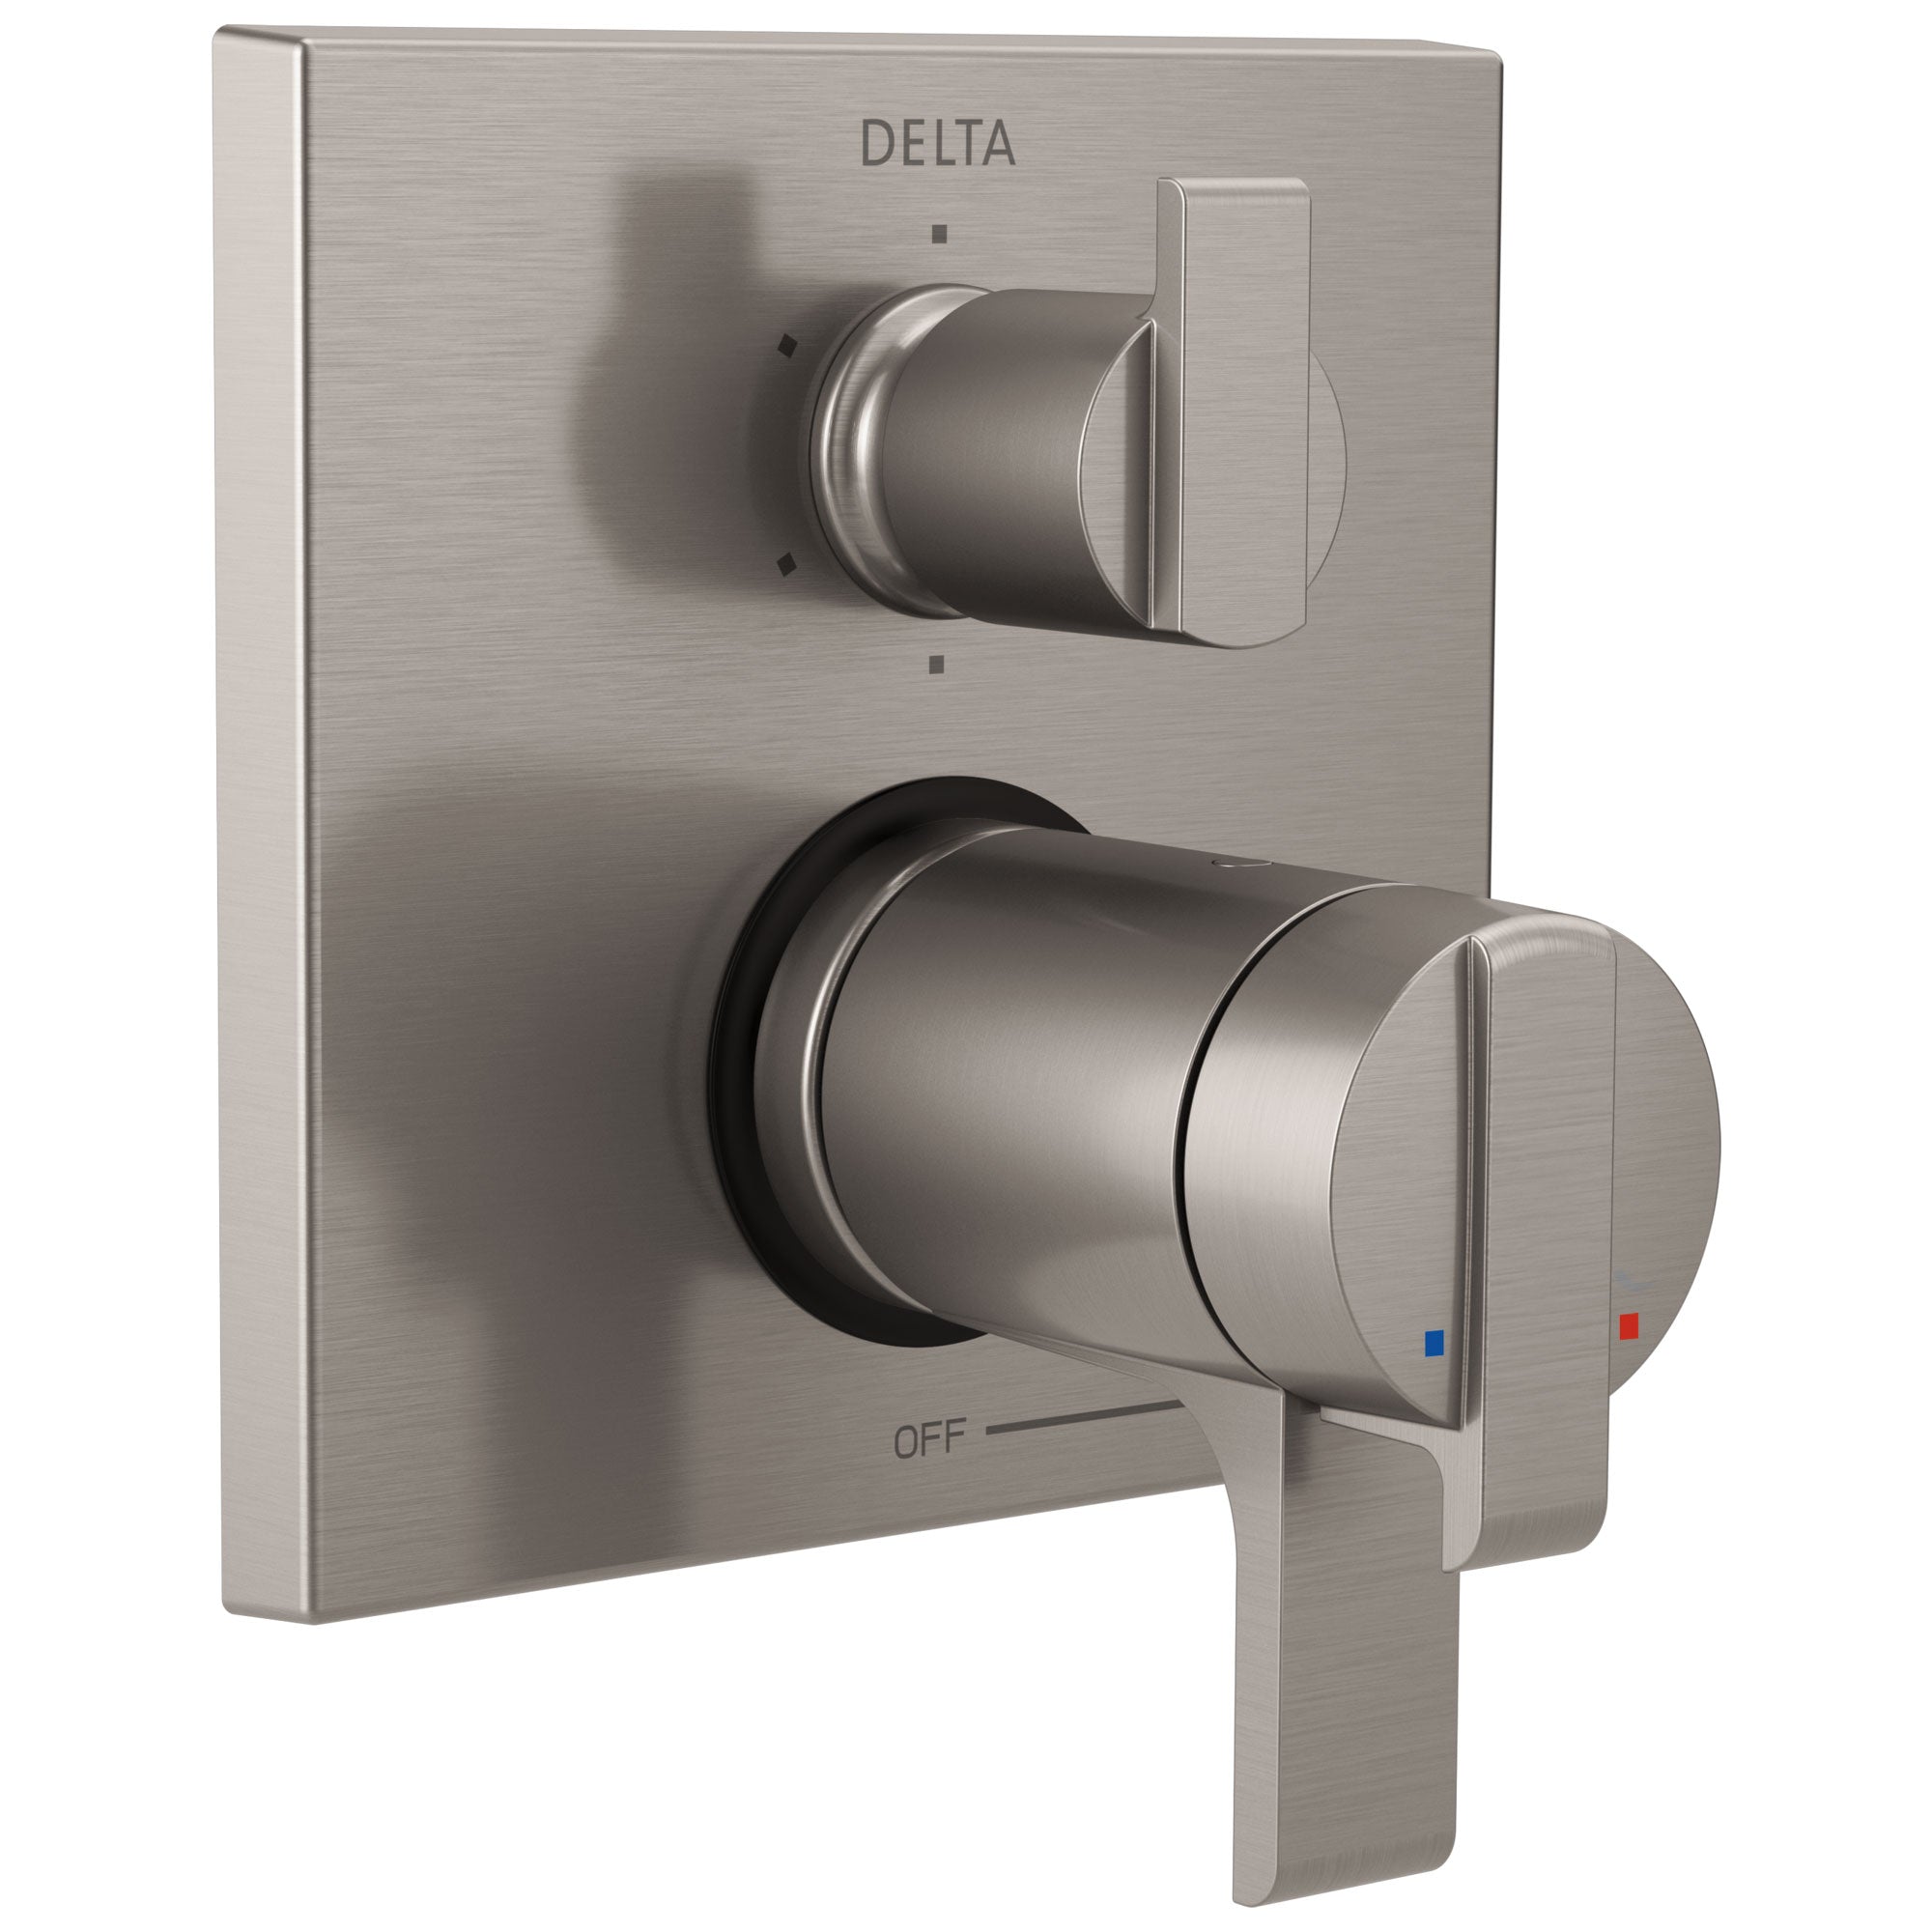 Delta Ara Collection Stainless Steel Finish Thermostatic Shower Faucet Control with 6-Setting Integrated Diverter Trim (Requires Valve) DT27T967SS